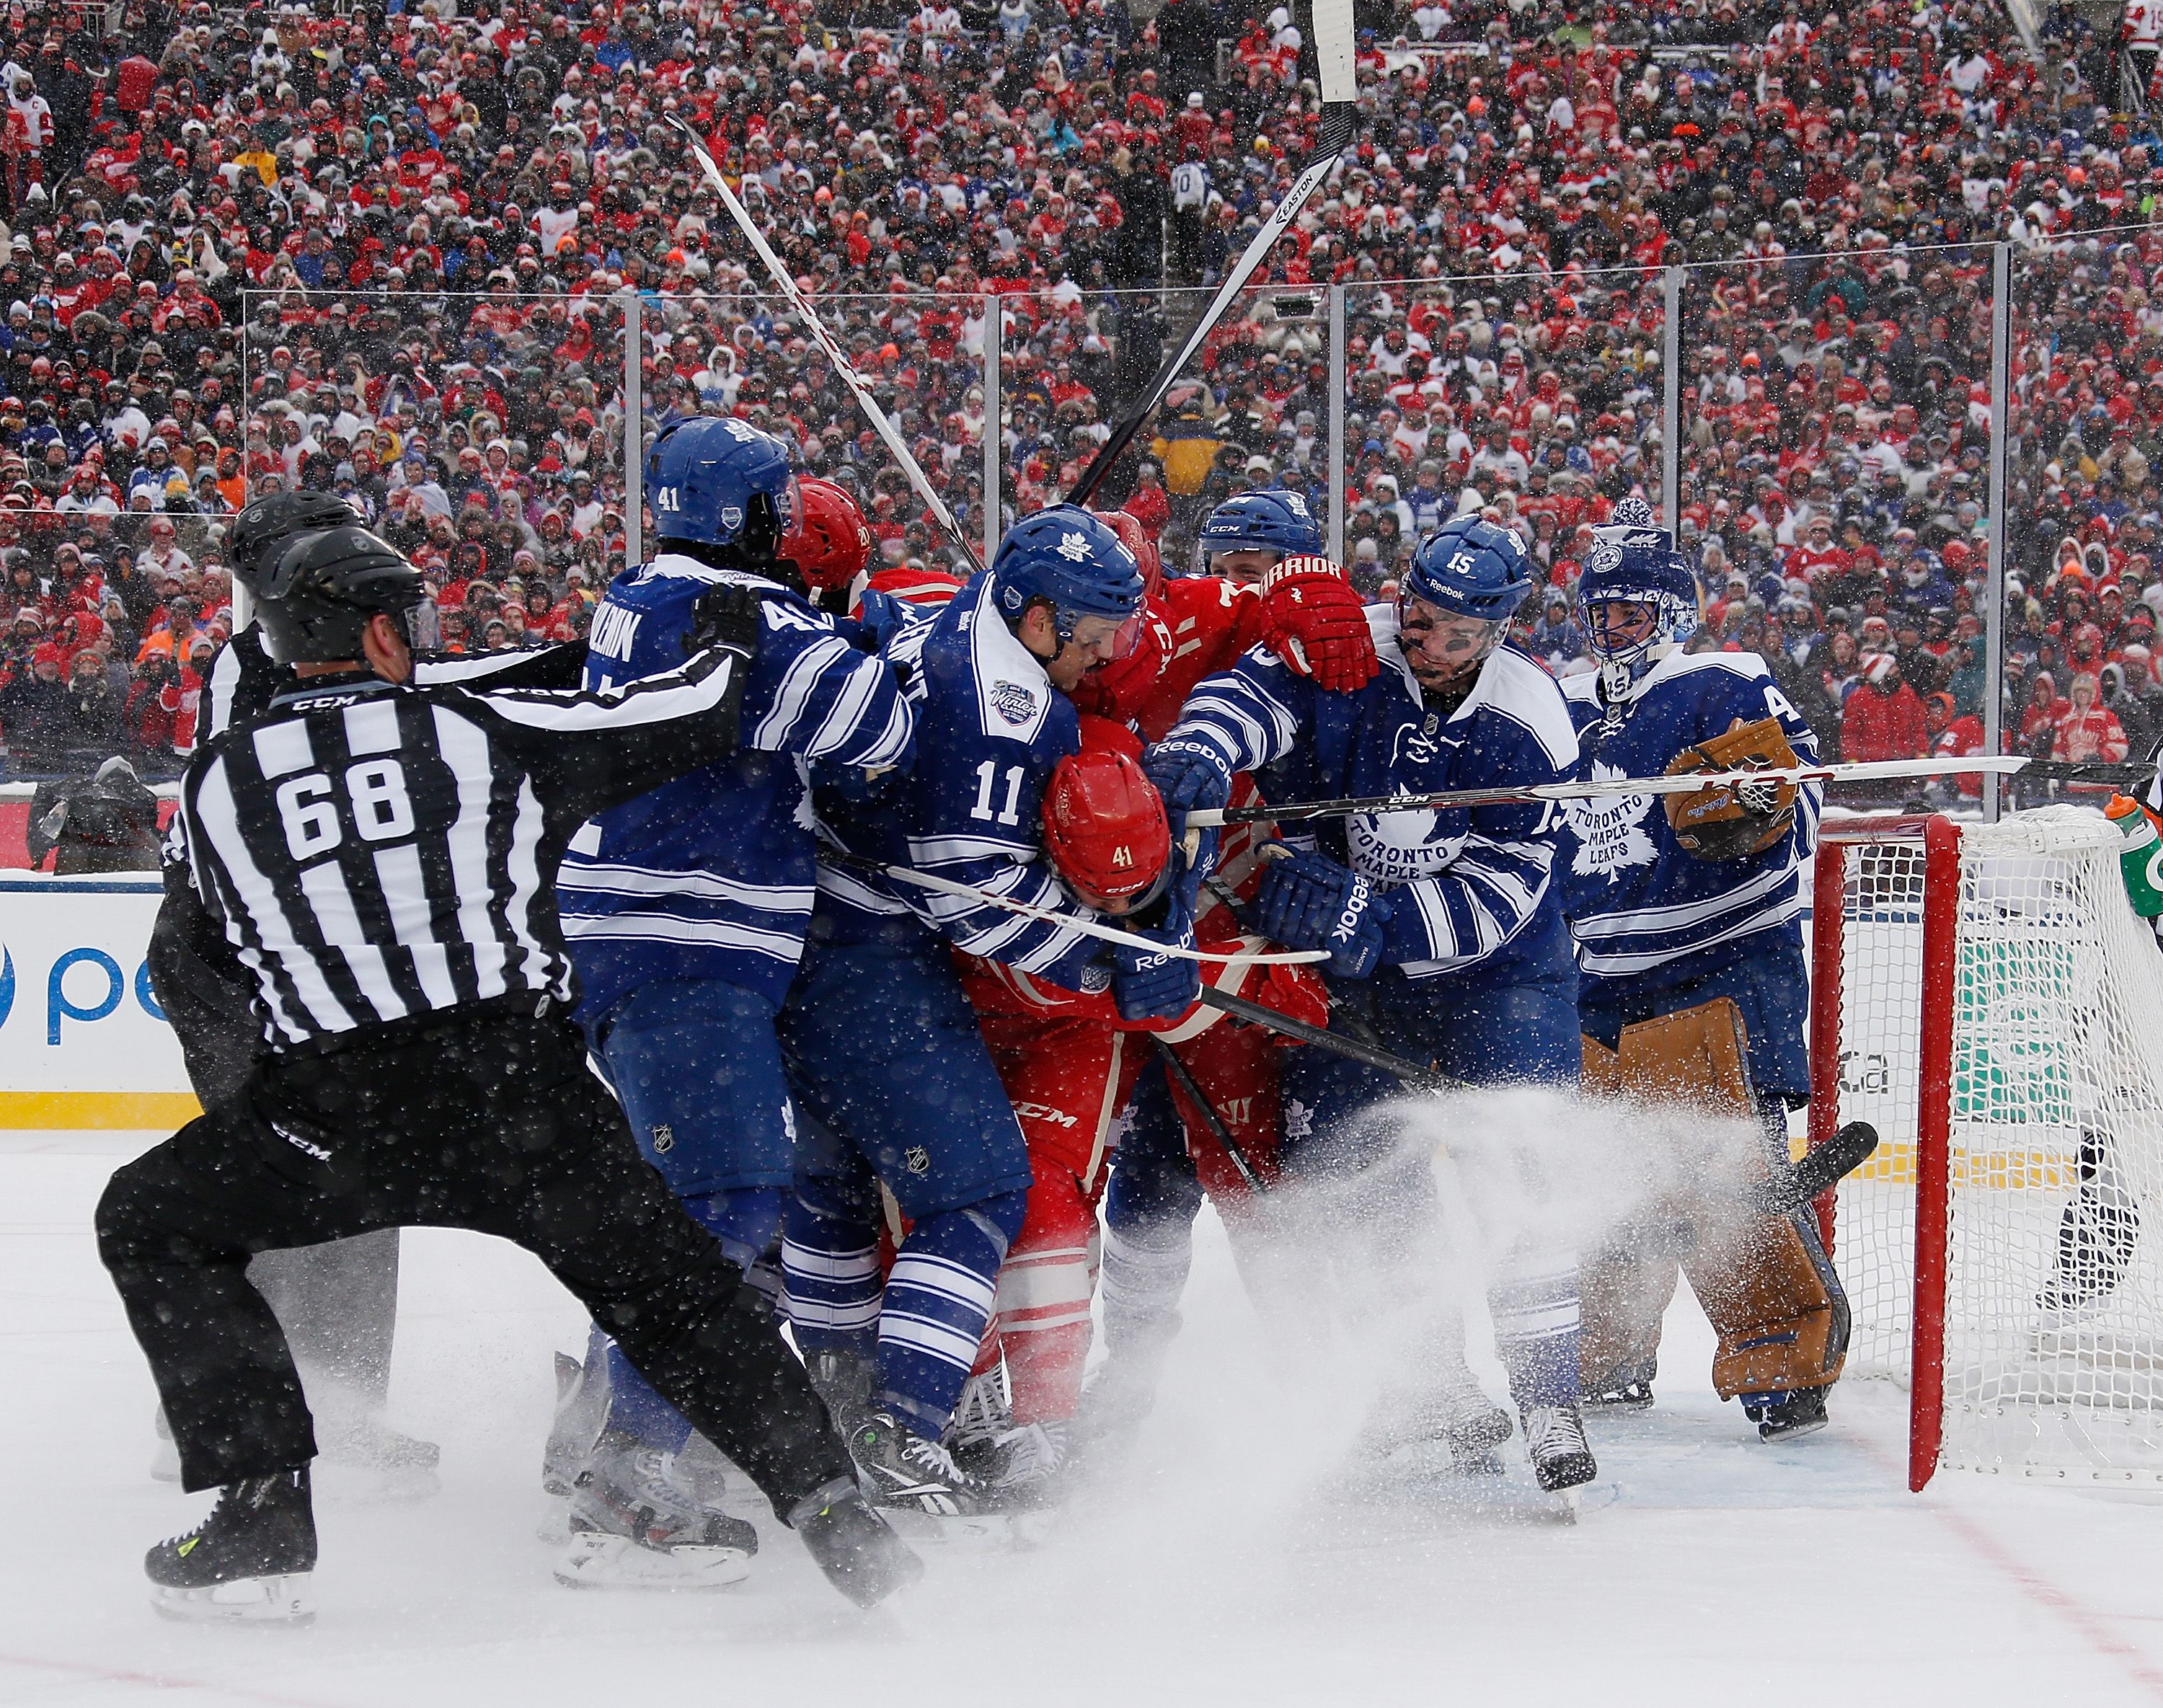 The NHL will barely avoid a meltdown in the 2020 Winter Classic